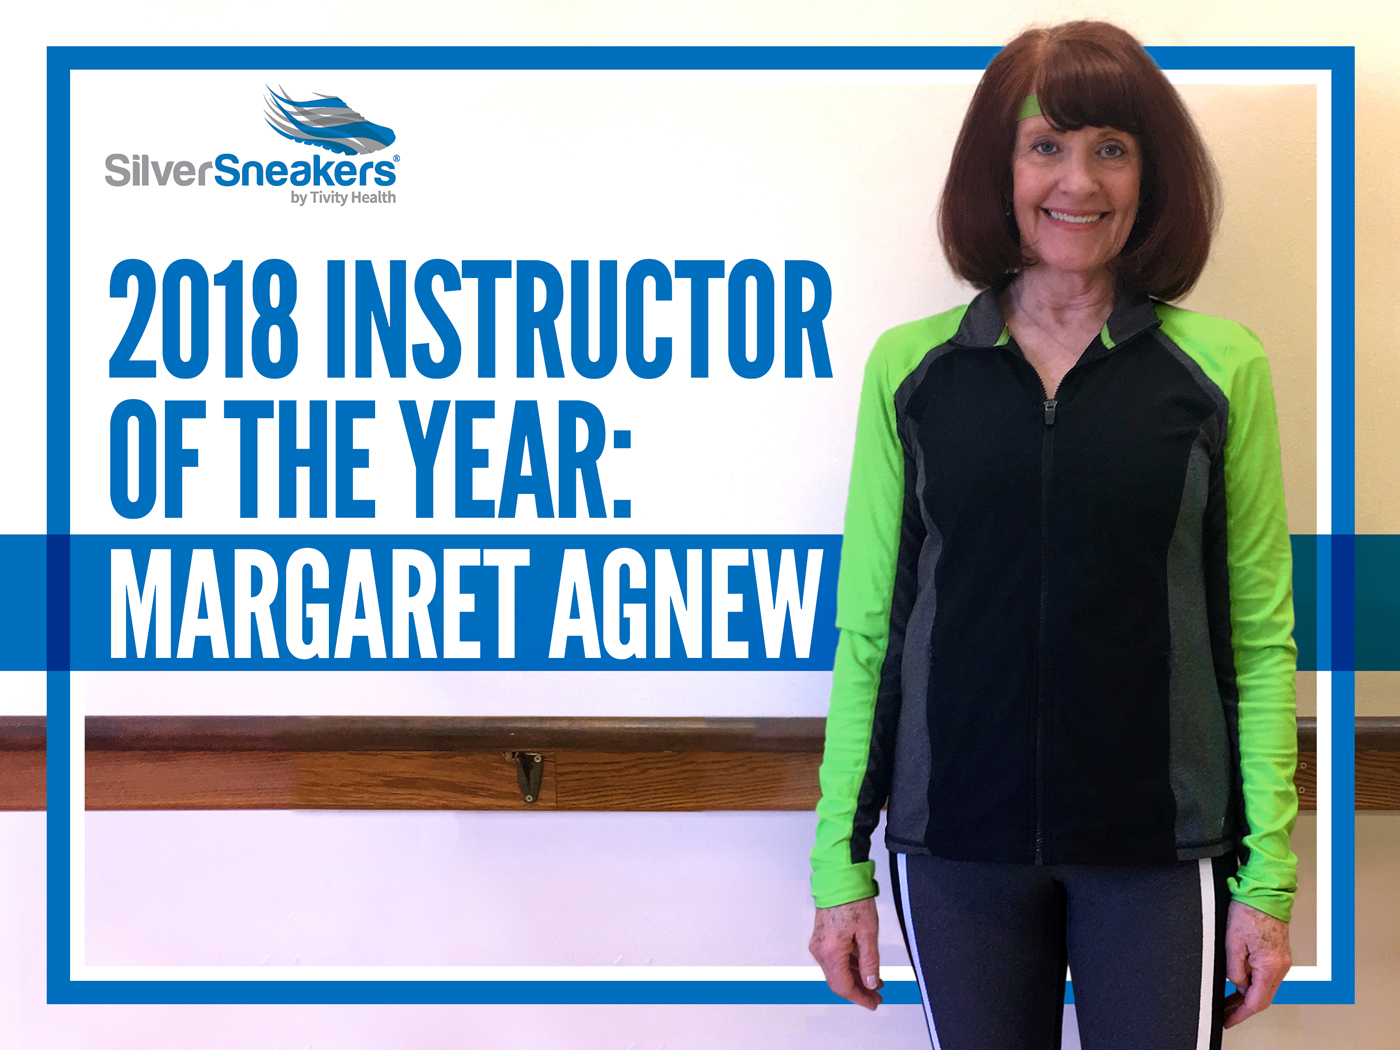 SilverSneakers 2018 Instructor of the Year Winner Margaret Agnew